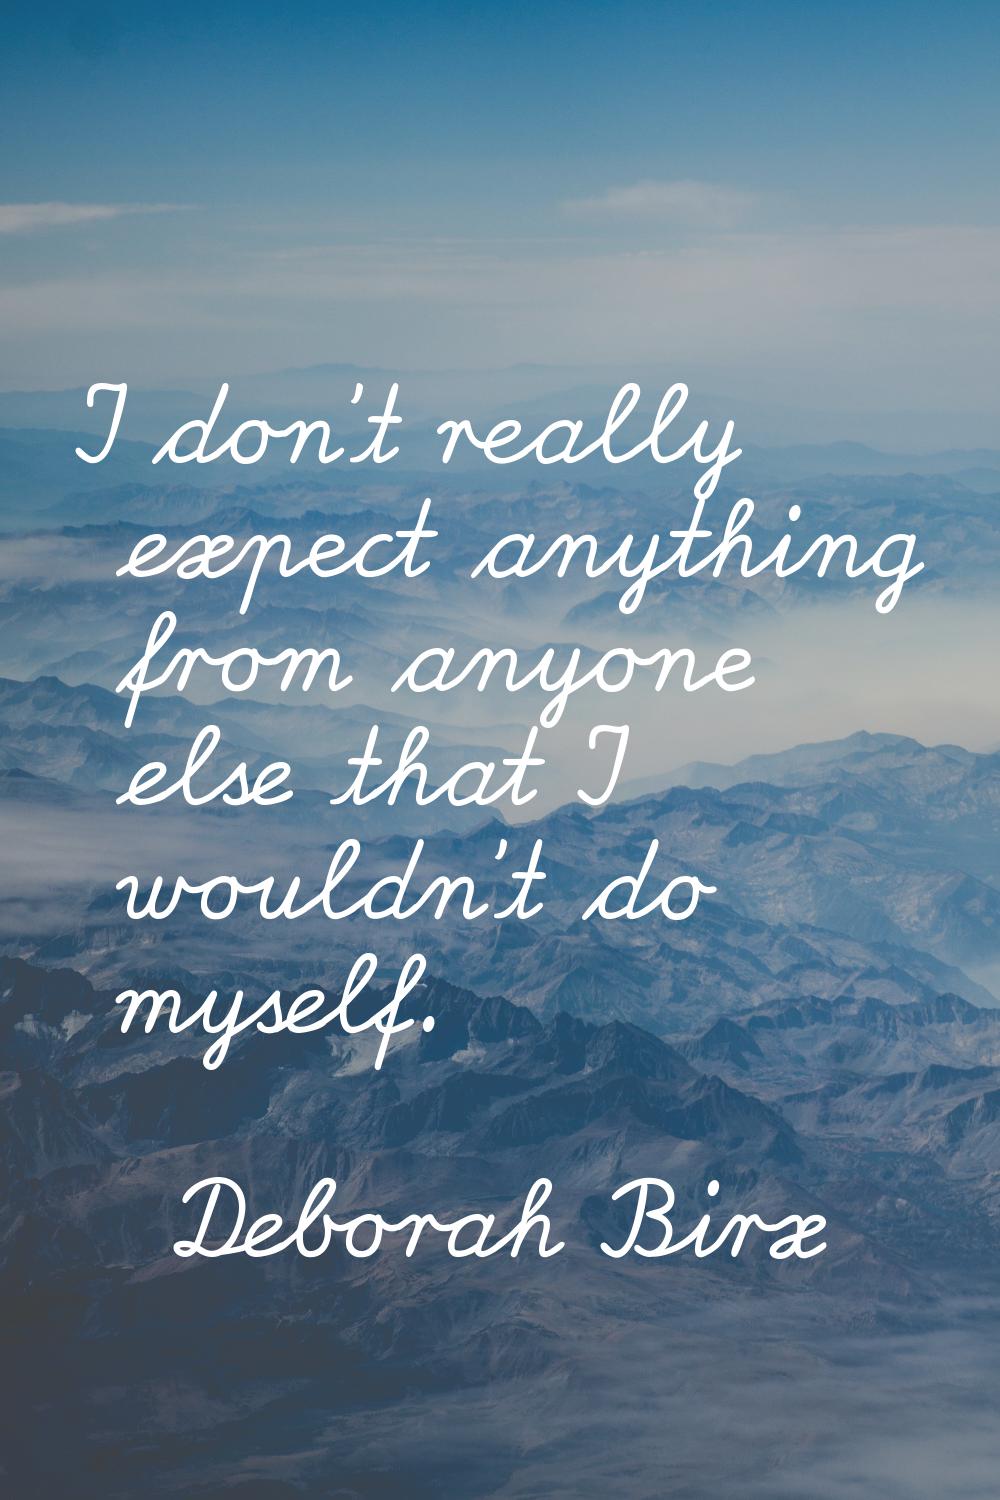 I don't really expect anything from anyone else that I wouldn't do myself.